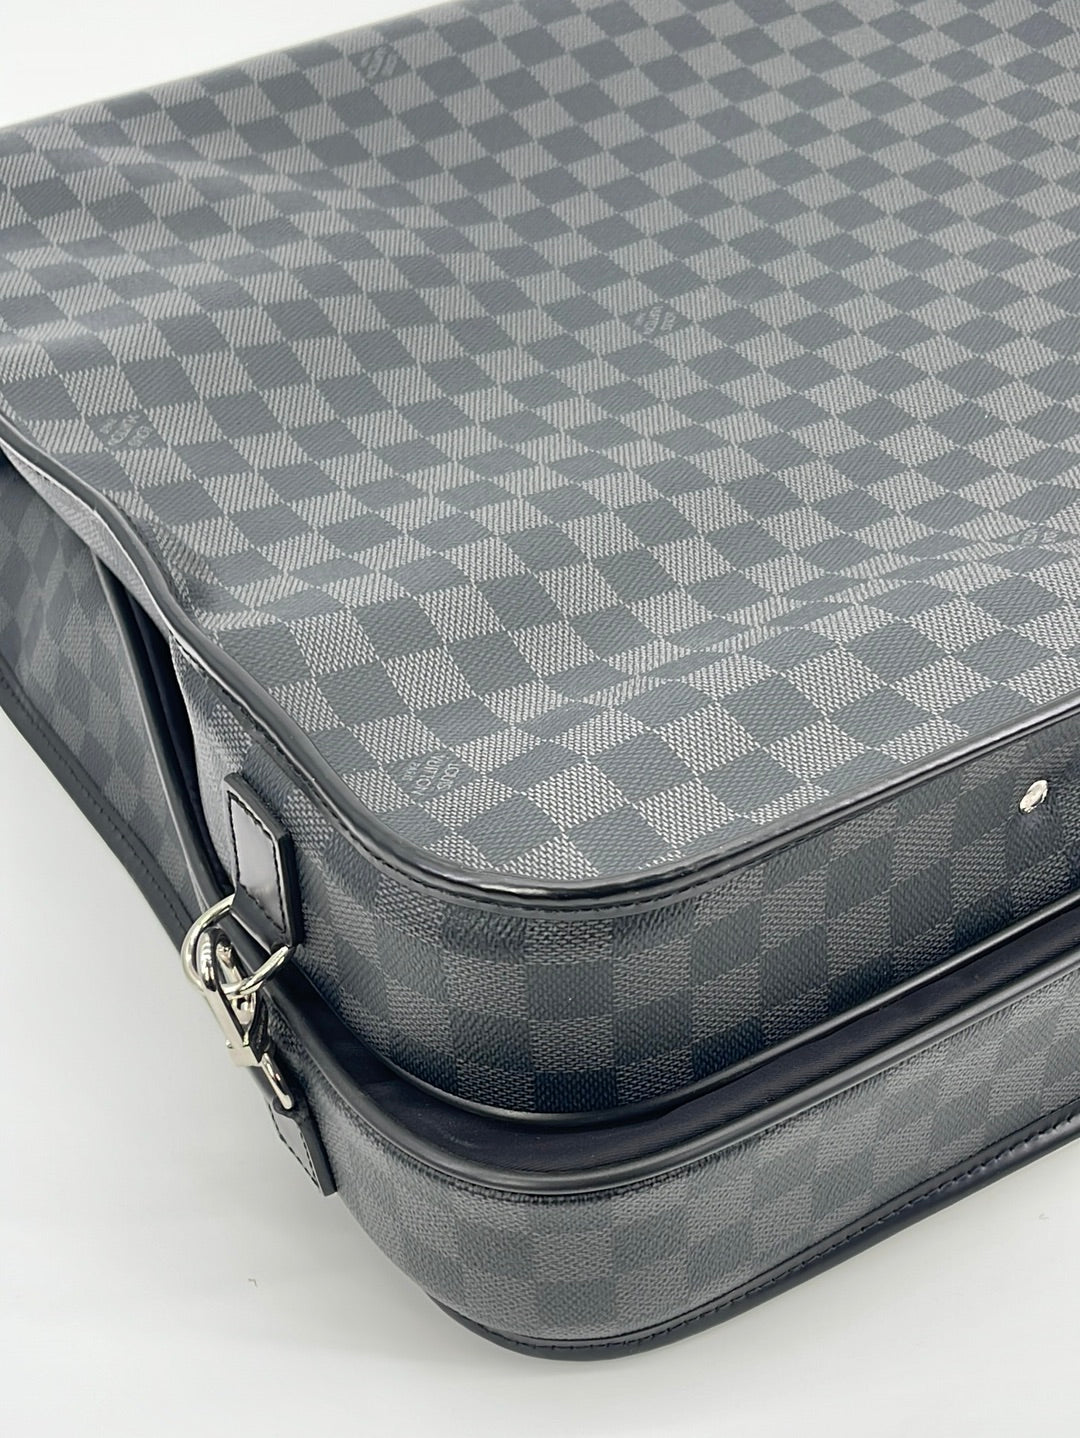 LOUIS VUITTON 2010 Damier Graphite Hanging Toiletry Luggage - Article  Consignment